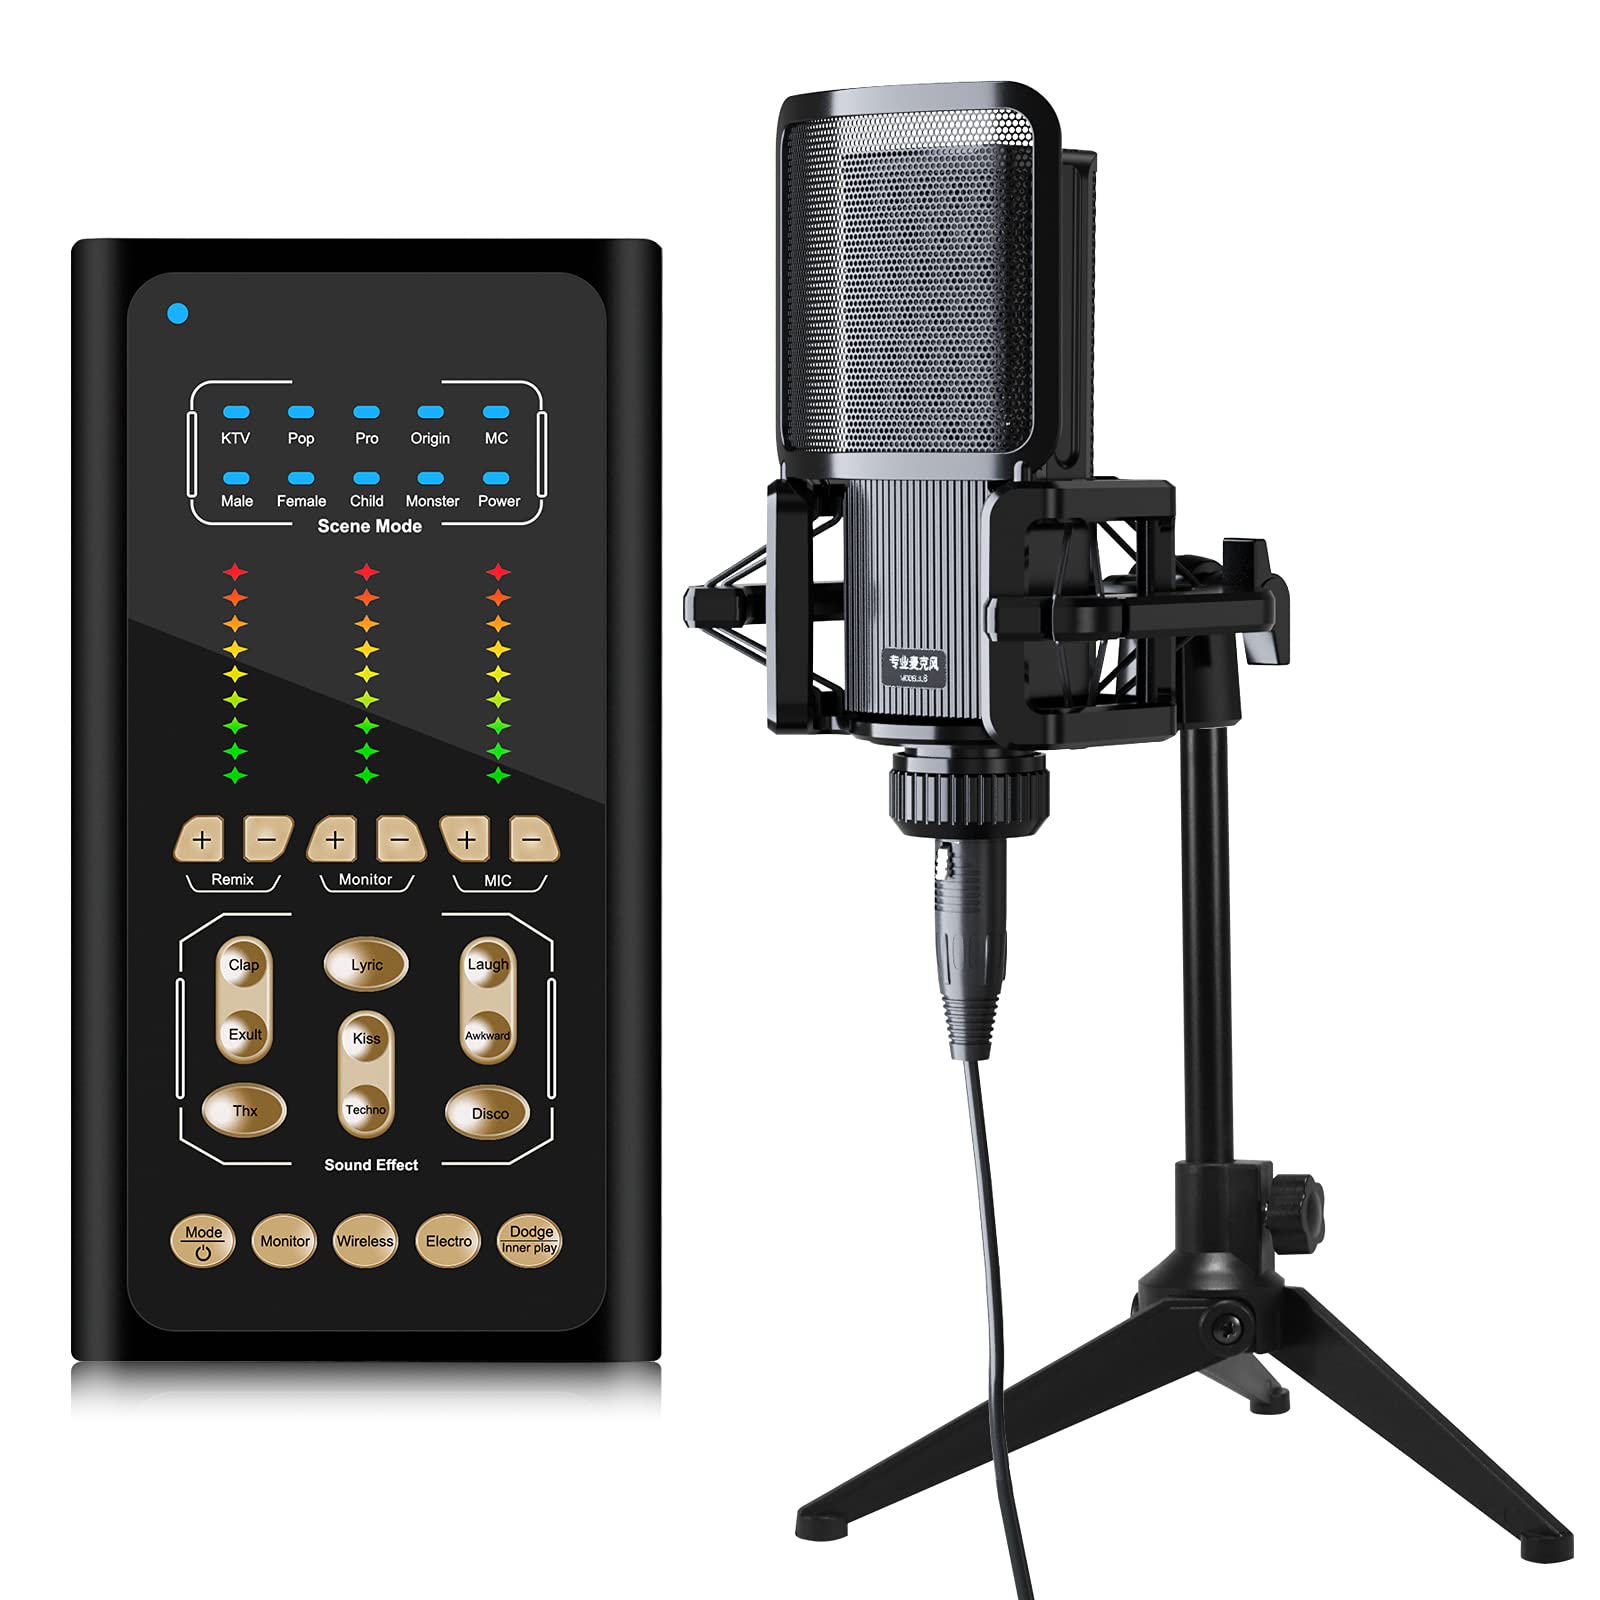 Male voice recording interface